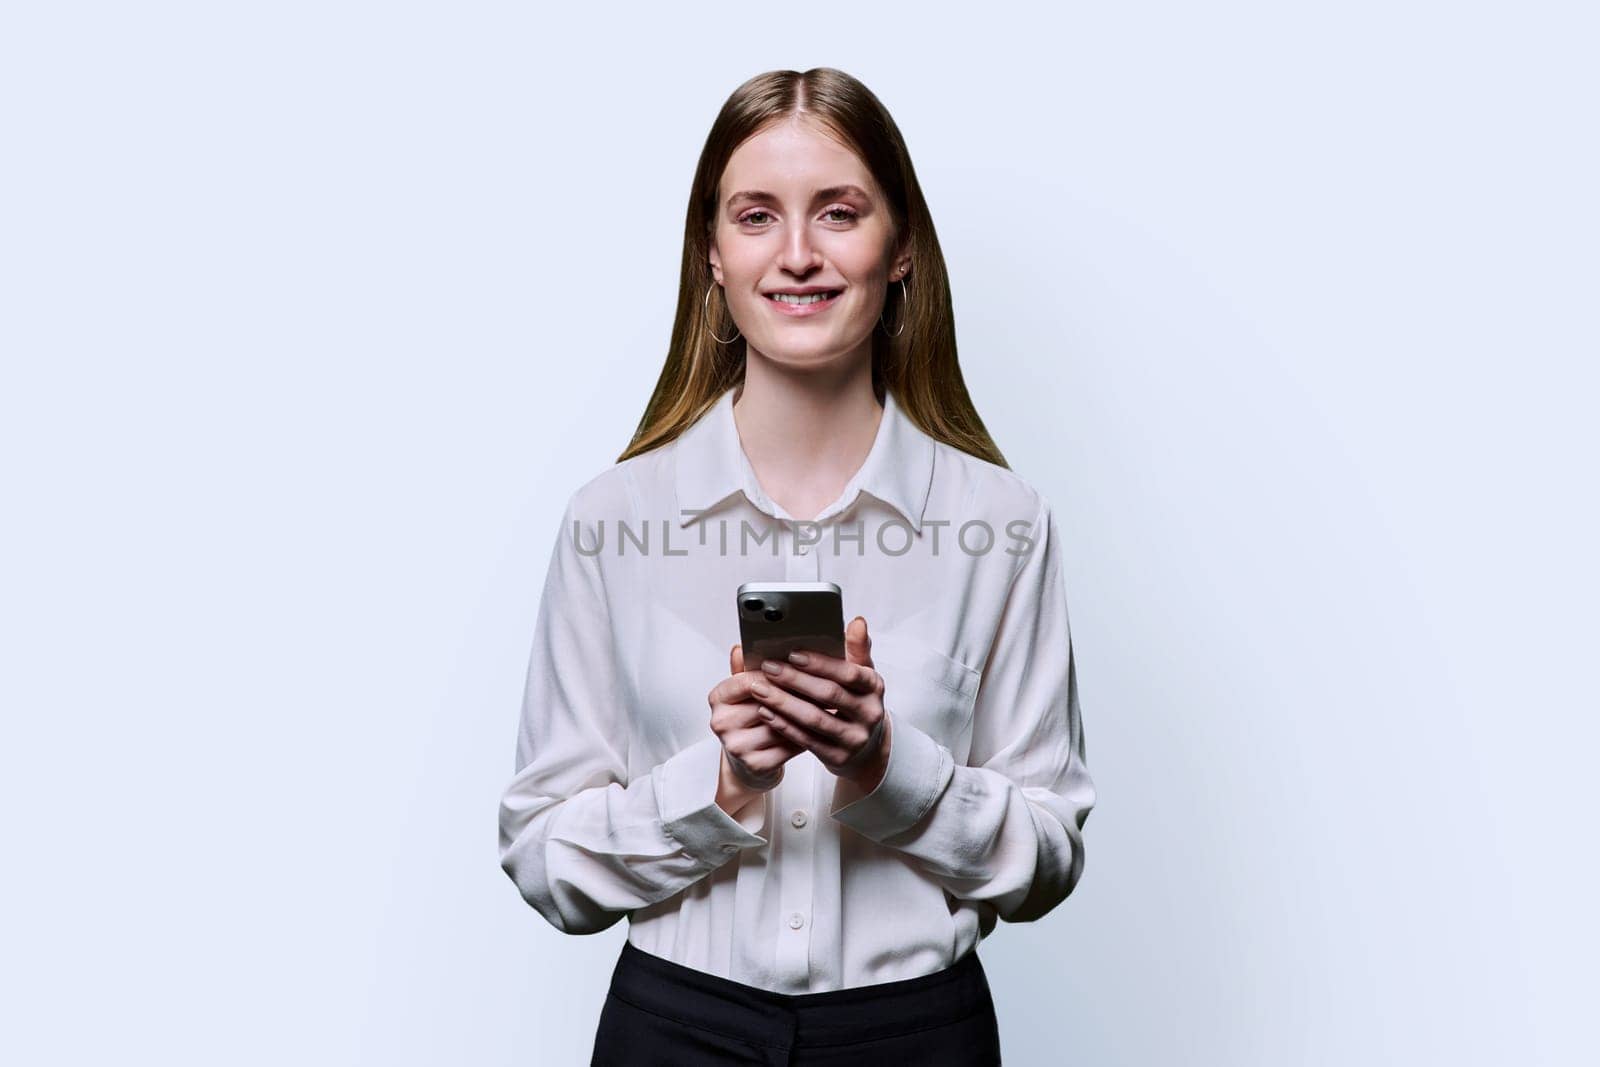 Teenage student girl 16, 17, 18 years old in white shirt holding smartphone in hands, smiling looking at camera on white studio background. Education, technology, high school, college, lifestyle, youth concept